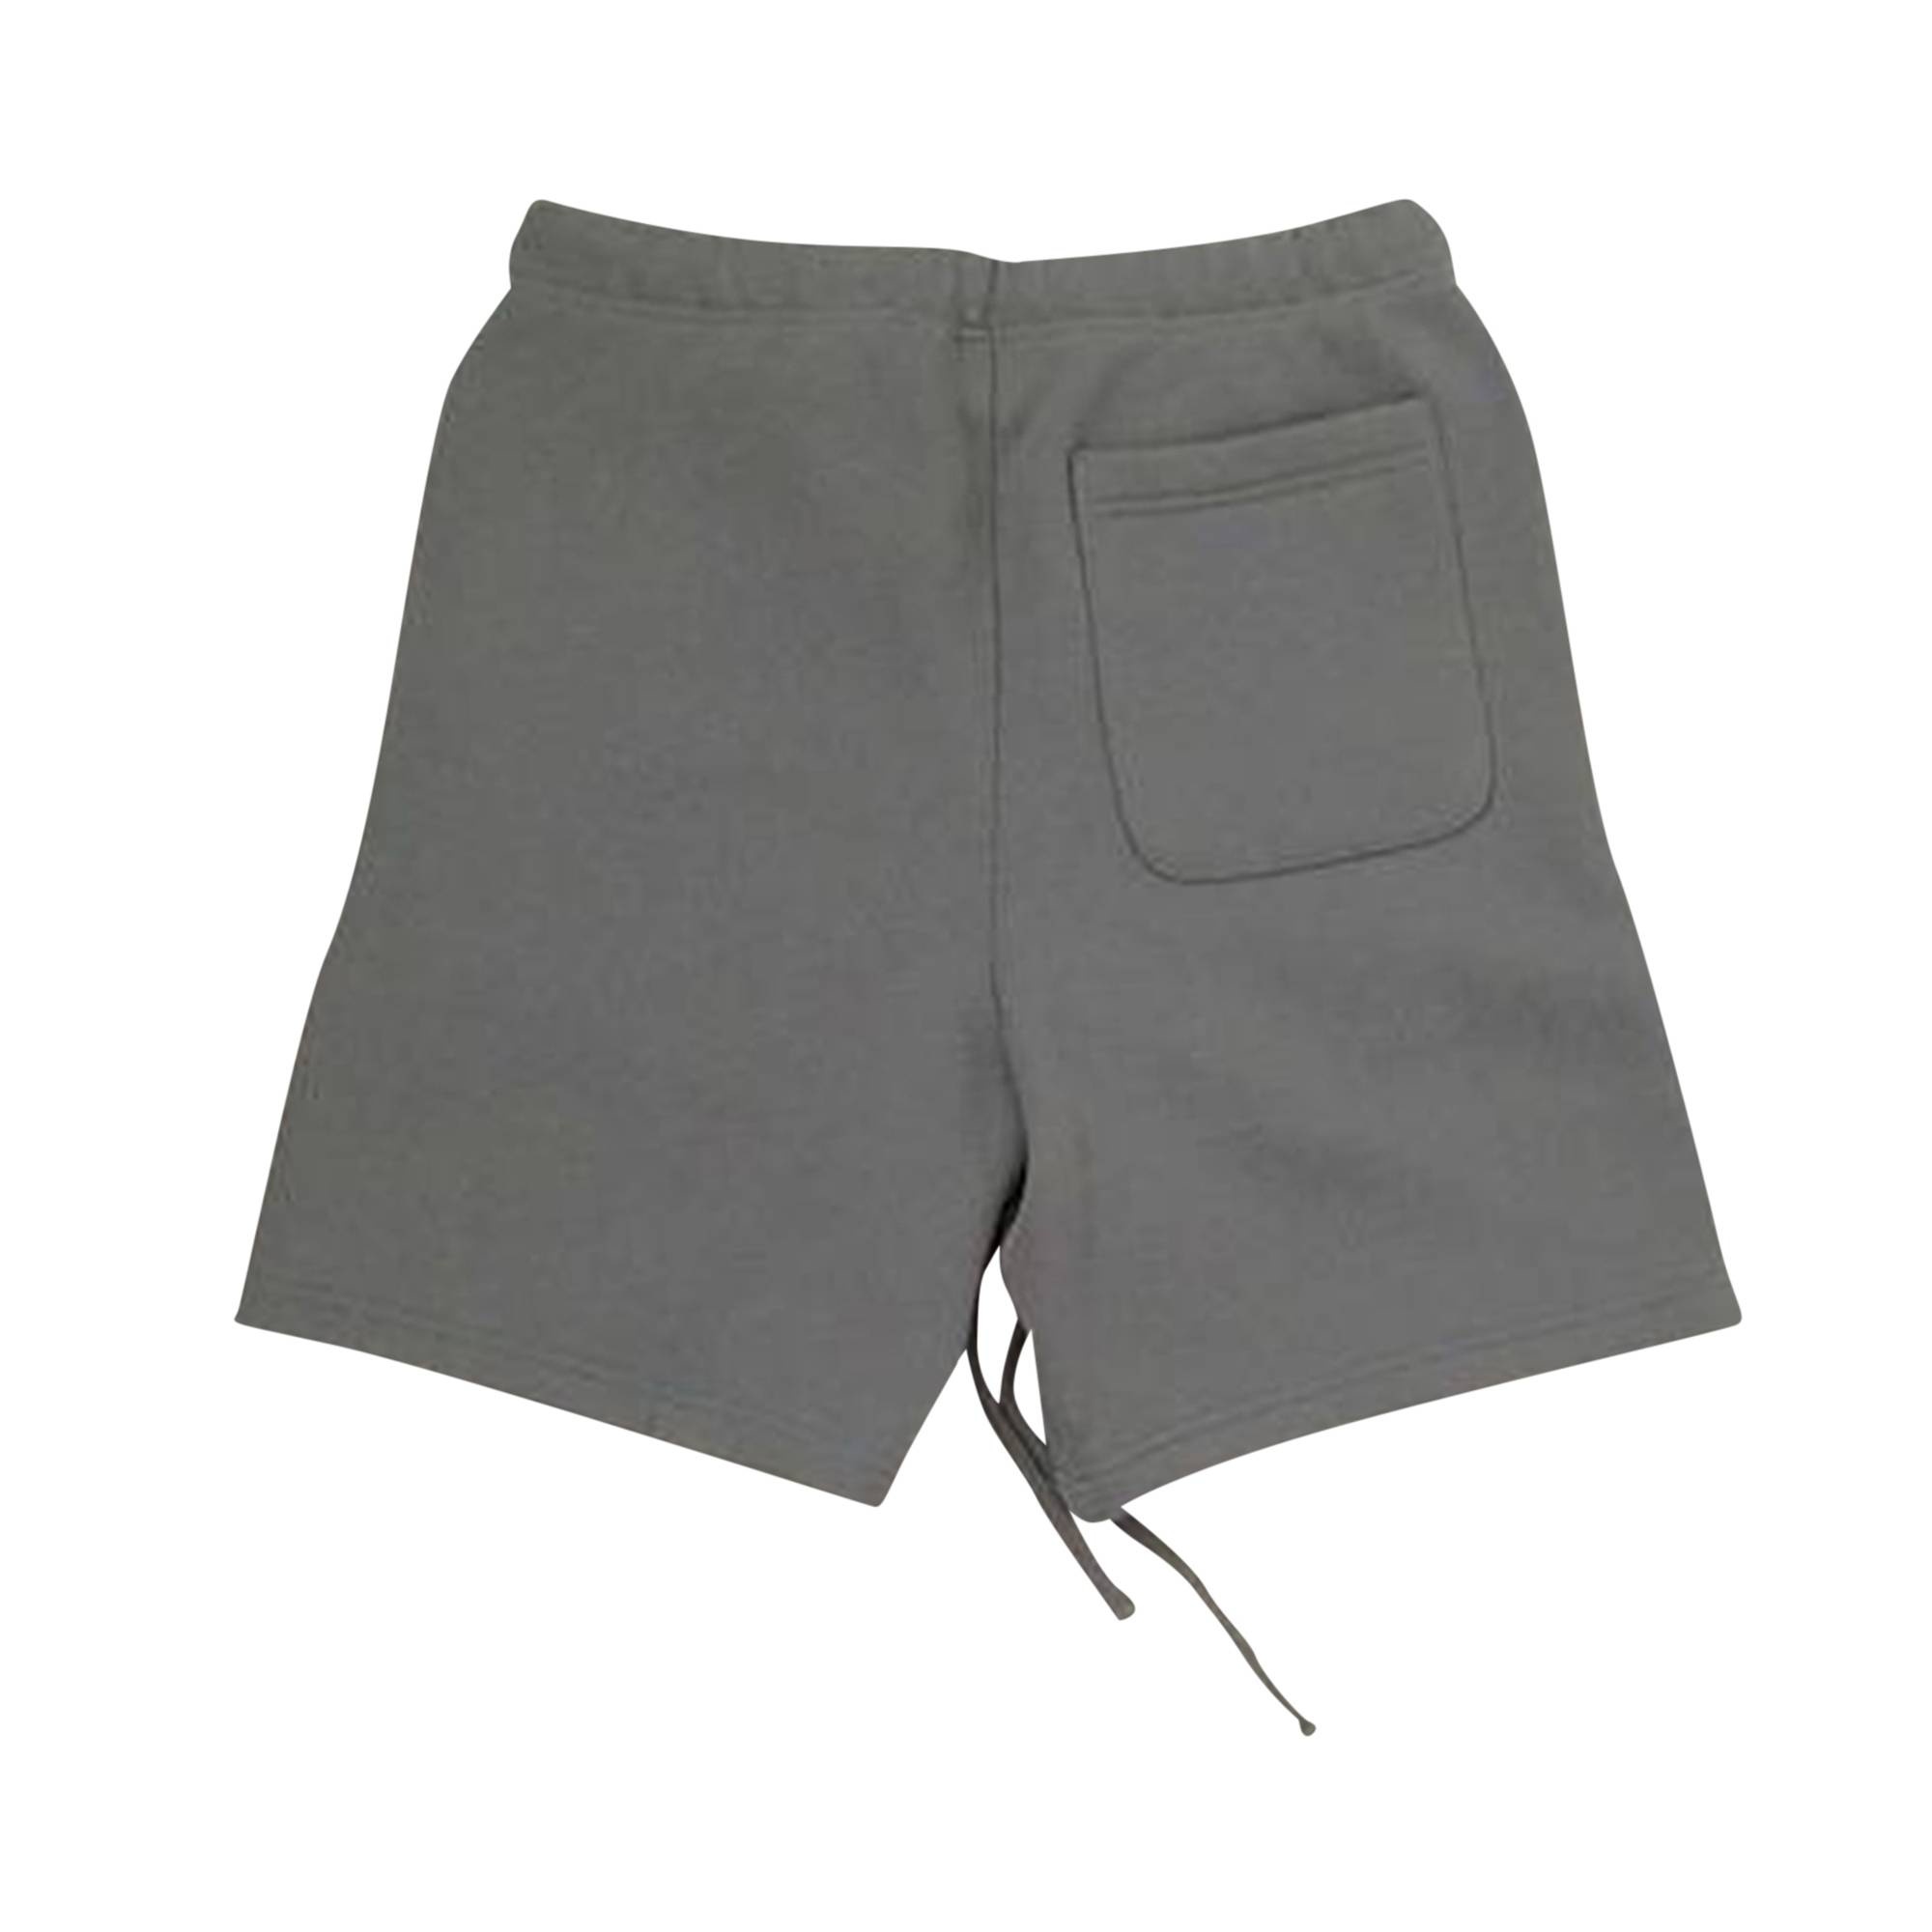 Fear of God Essentials Sweat Shorts 'Cement' - 2